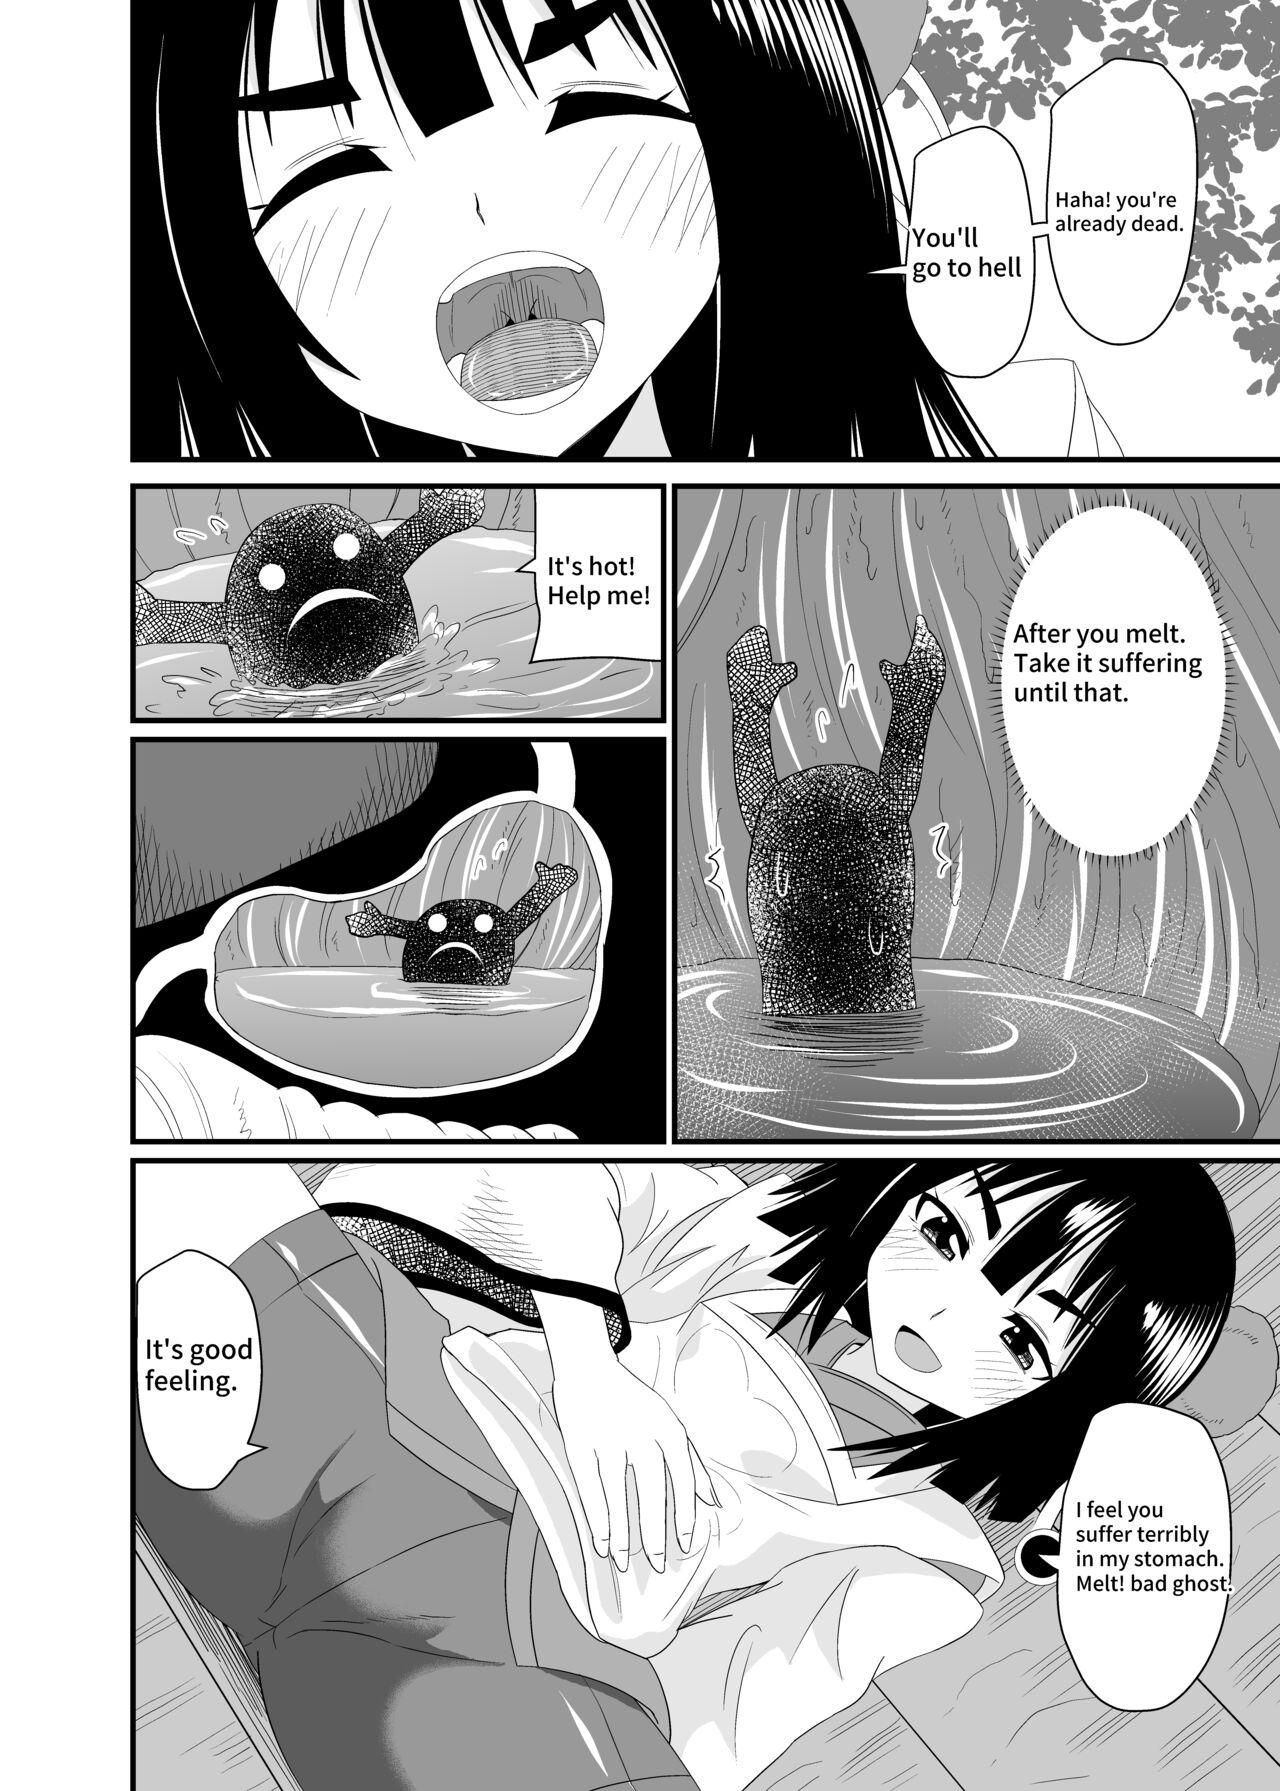 Face Fucking Exorcism by swallowing the snake god - Original Erotica - Page 11